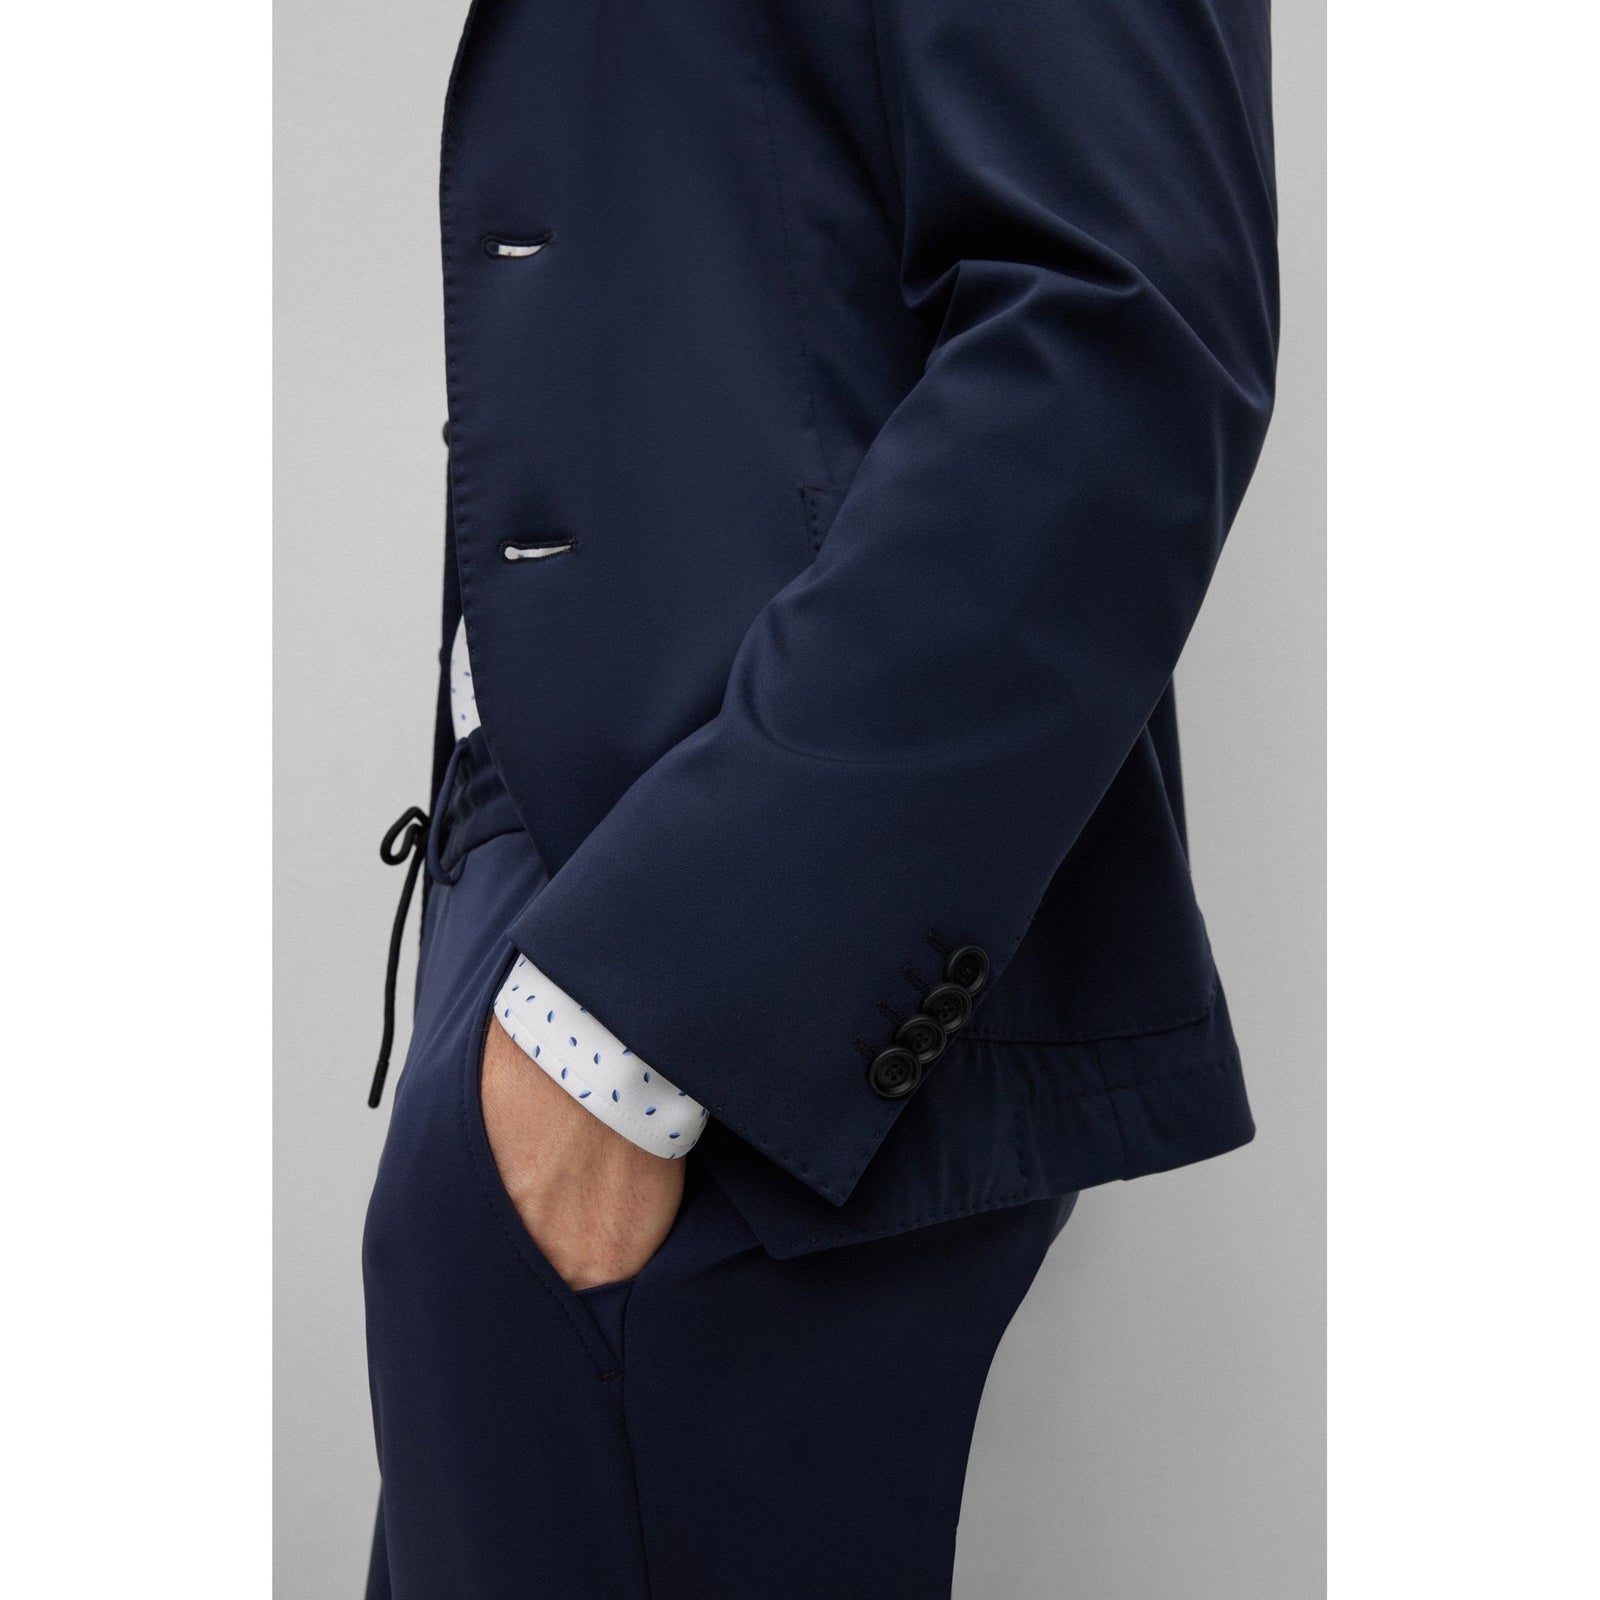 BOSS SLIM-FIT JACKET IN PERFORMANCE-STRETCH CLOTH - Yooto